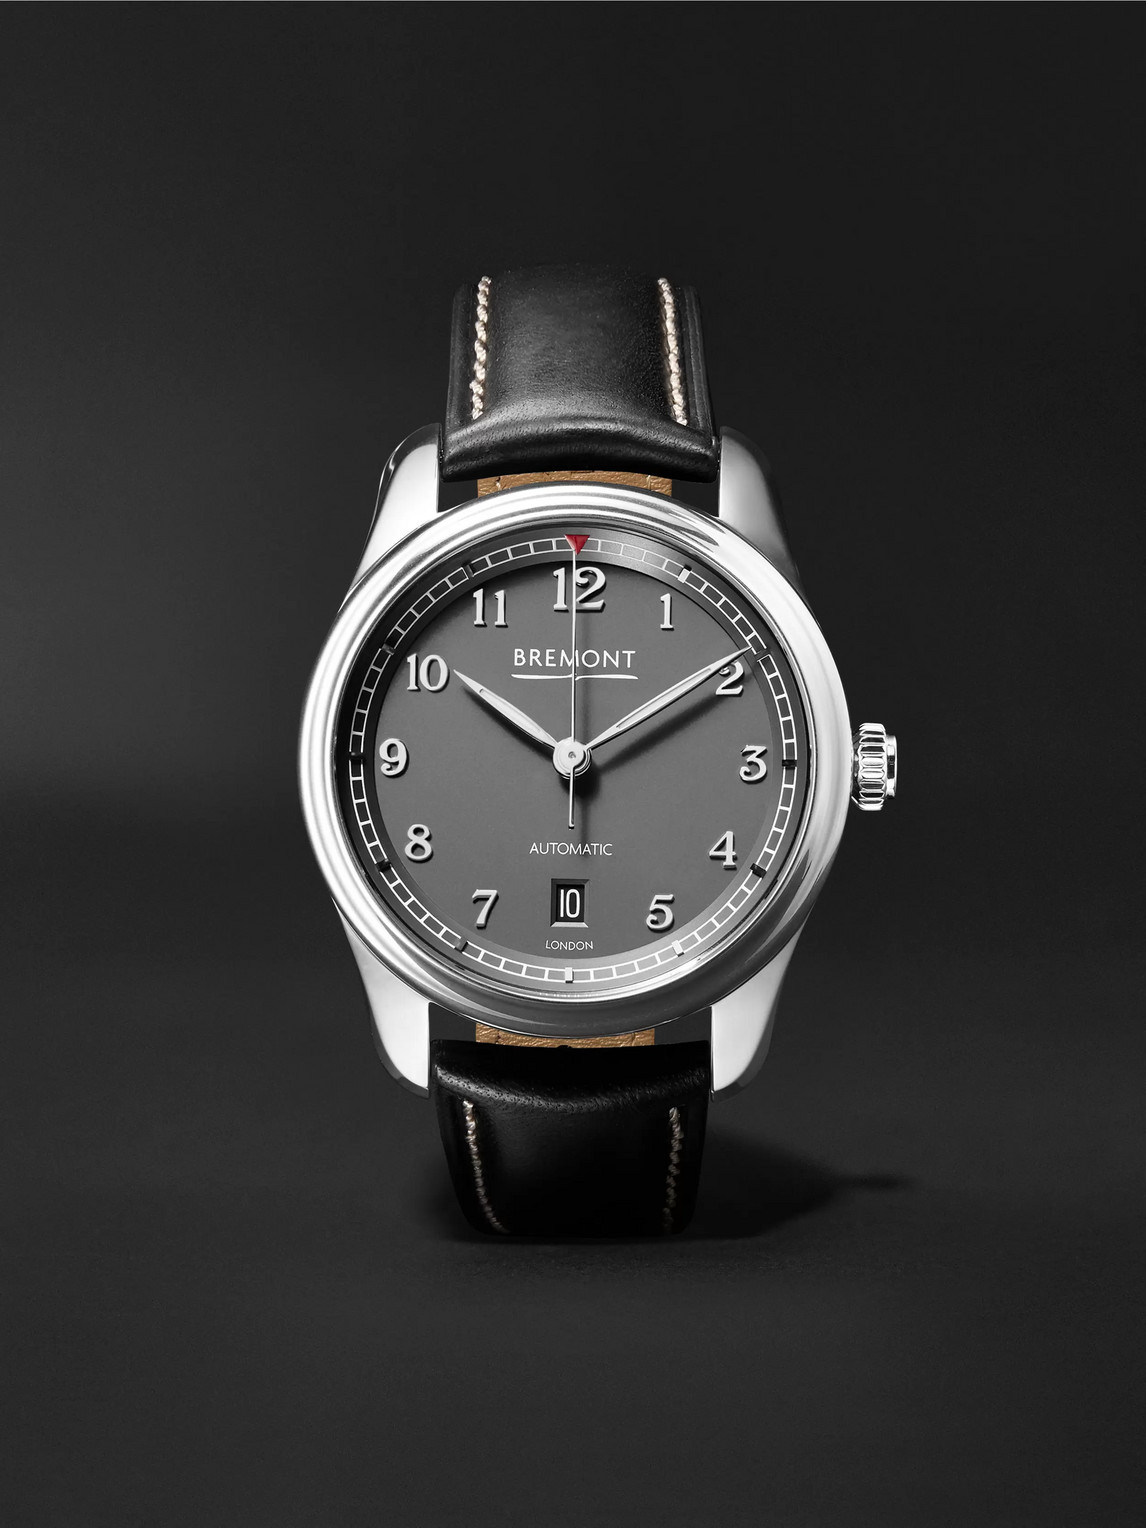 BREMONT AIRCO MACH 2 ANTHRACITE AUTOMATIC 40MM STAINLESS STEEL AND LEATHER WATCH, REF. AIRCO-M2-AN-R-S